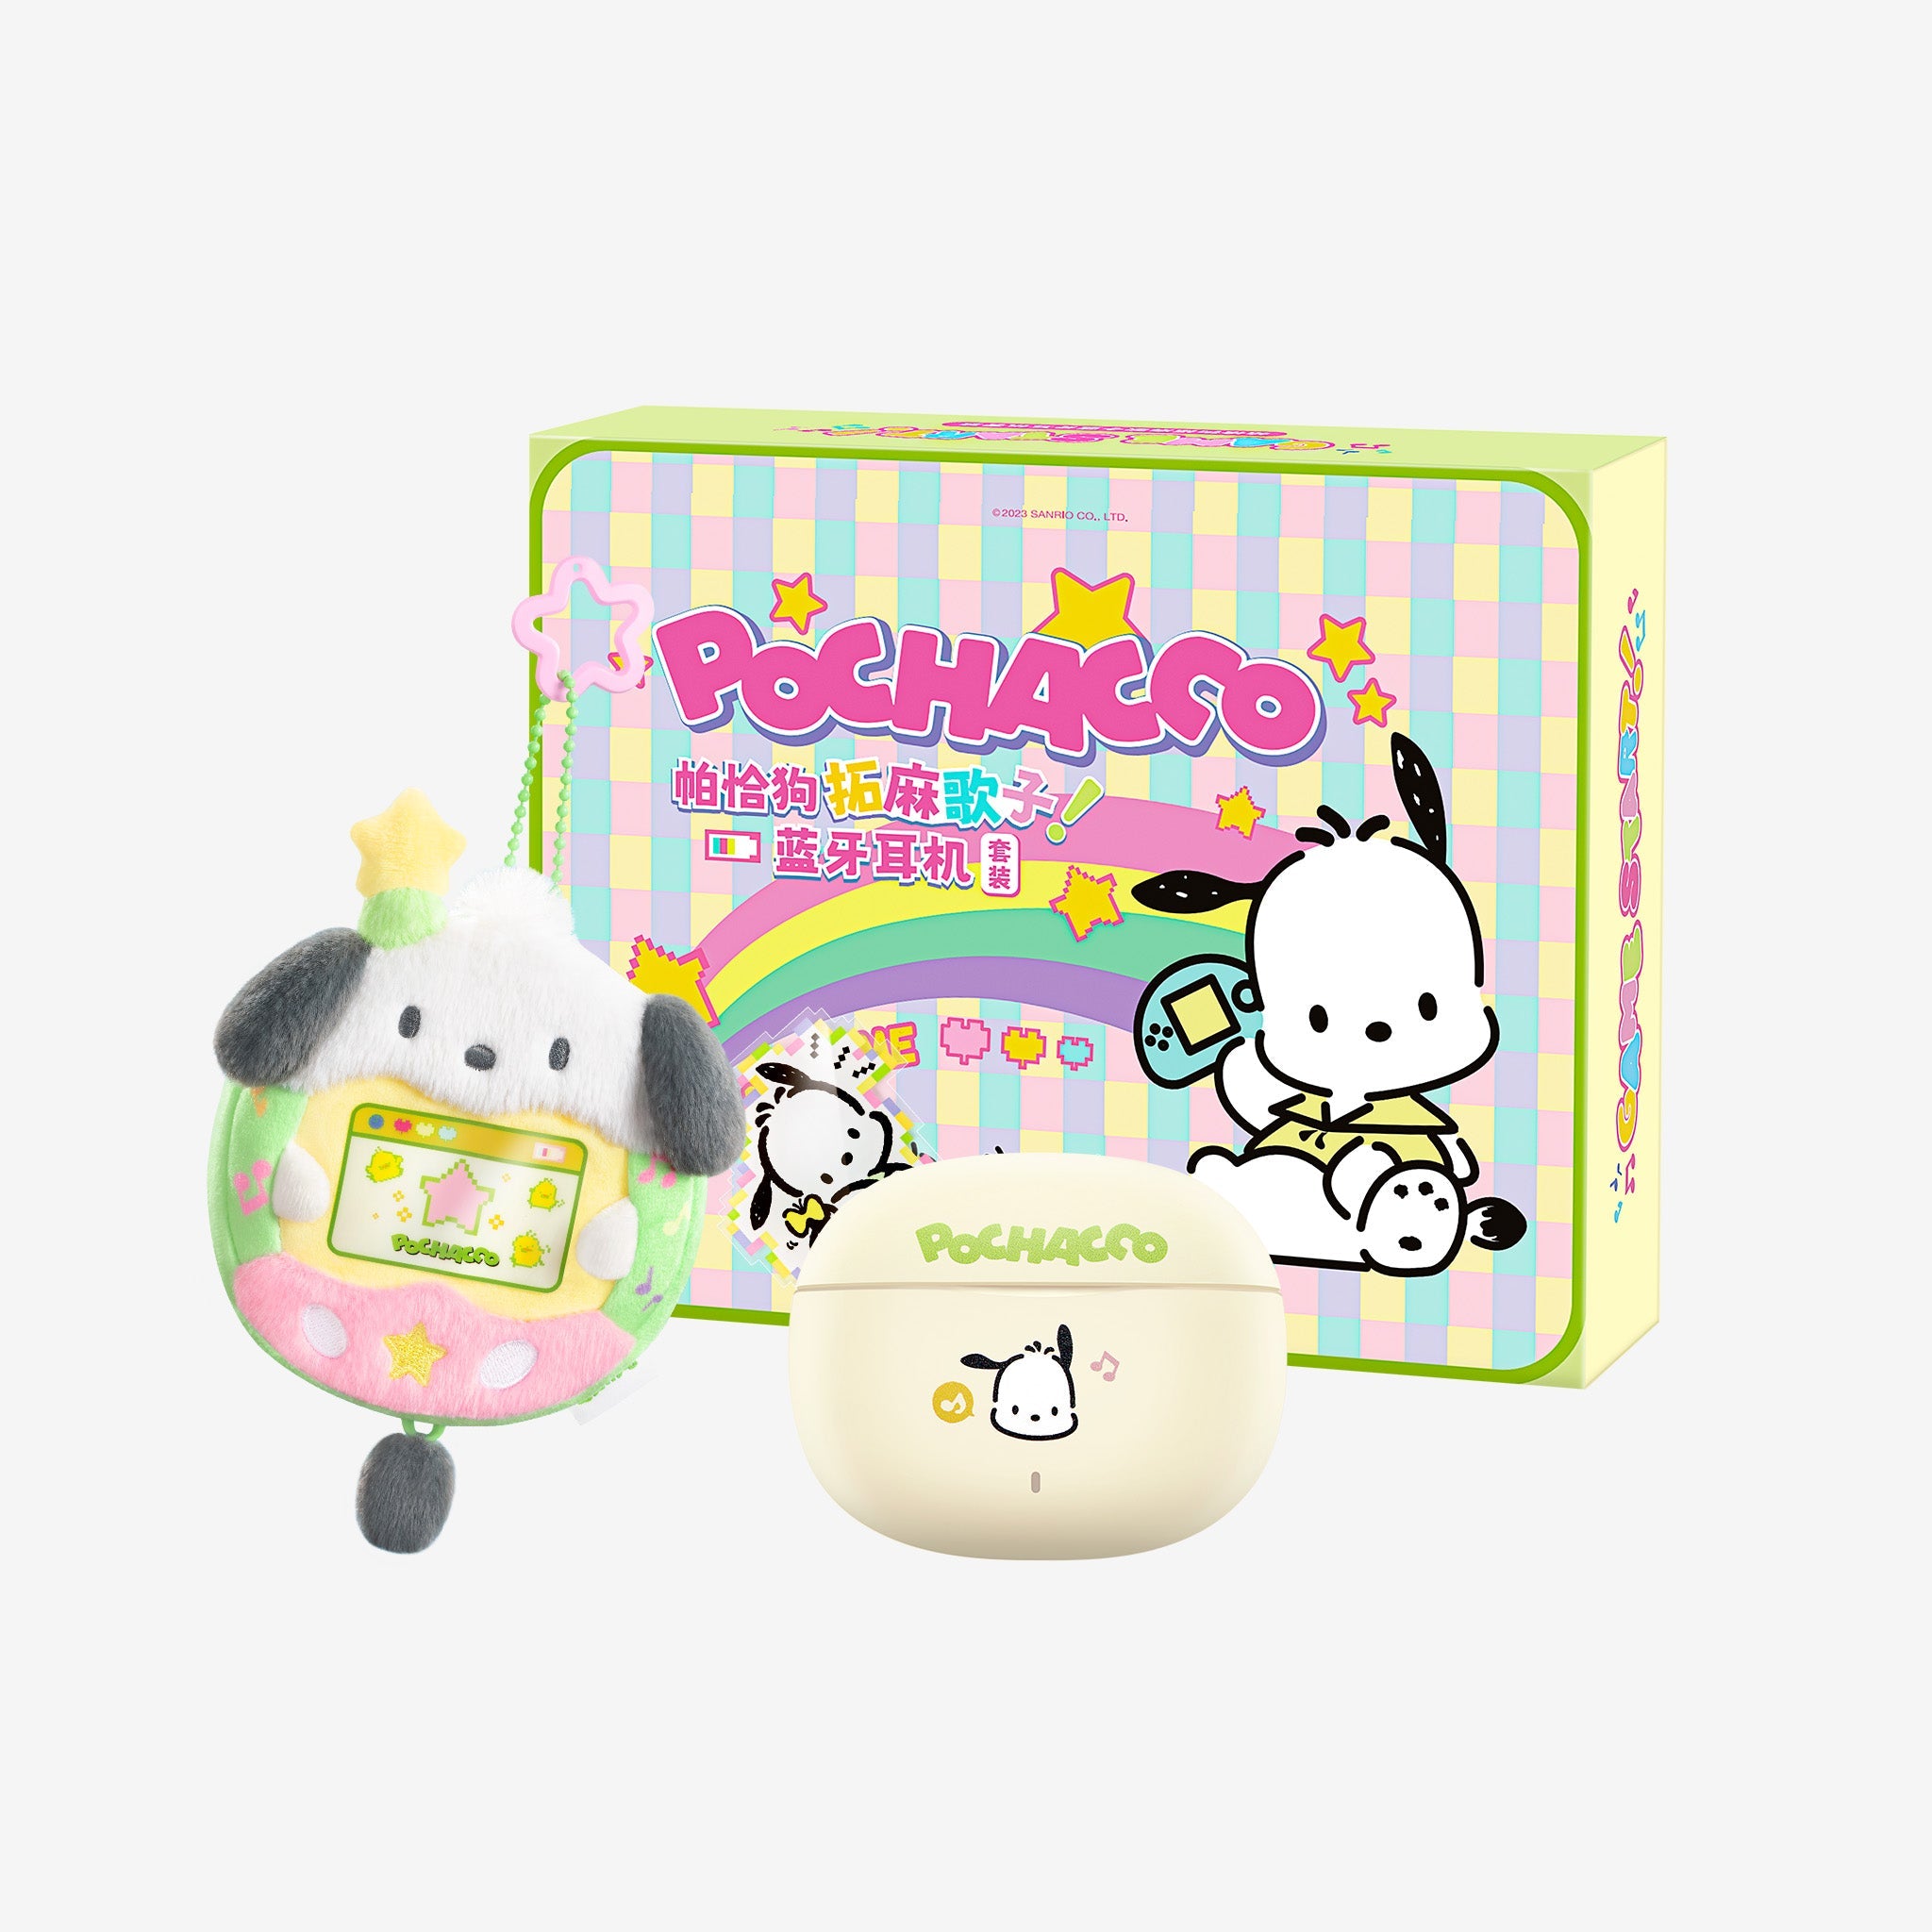 Pochacco Bluetooth Earphone for iPhone Android